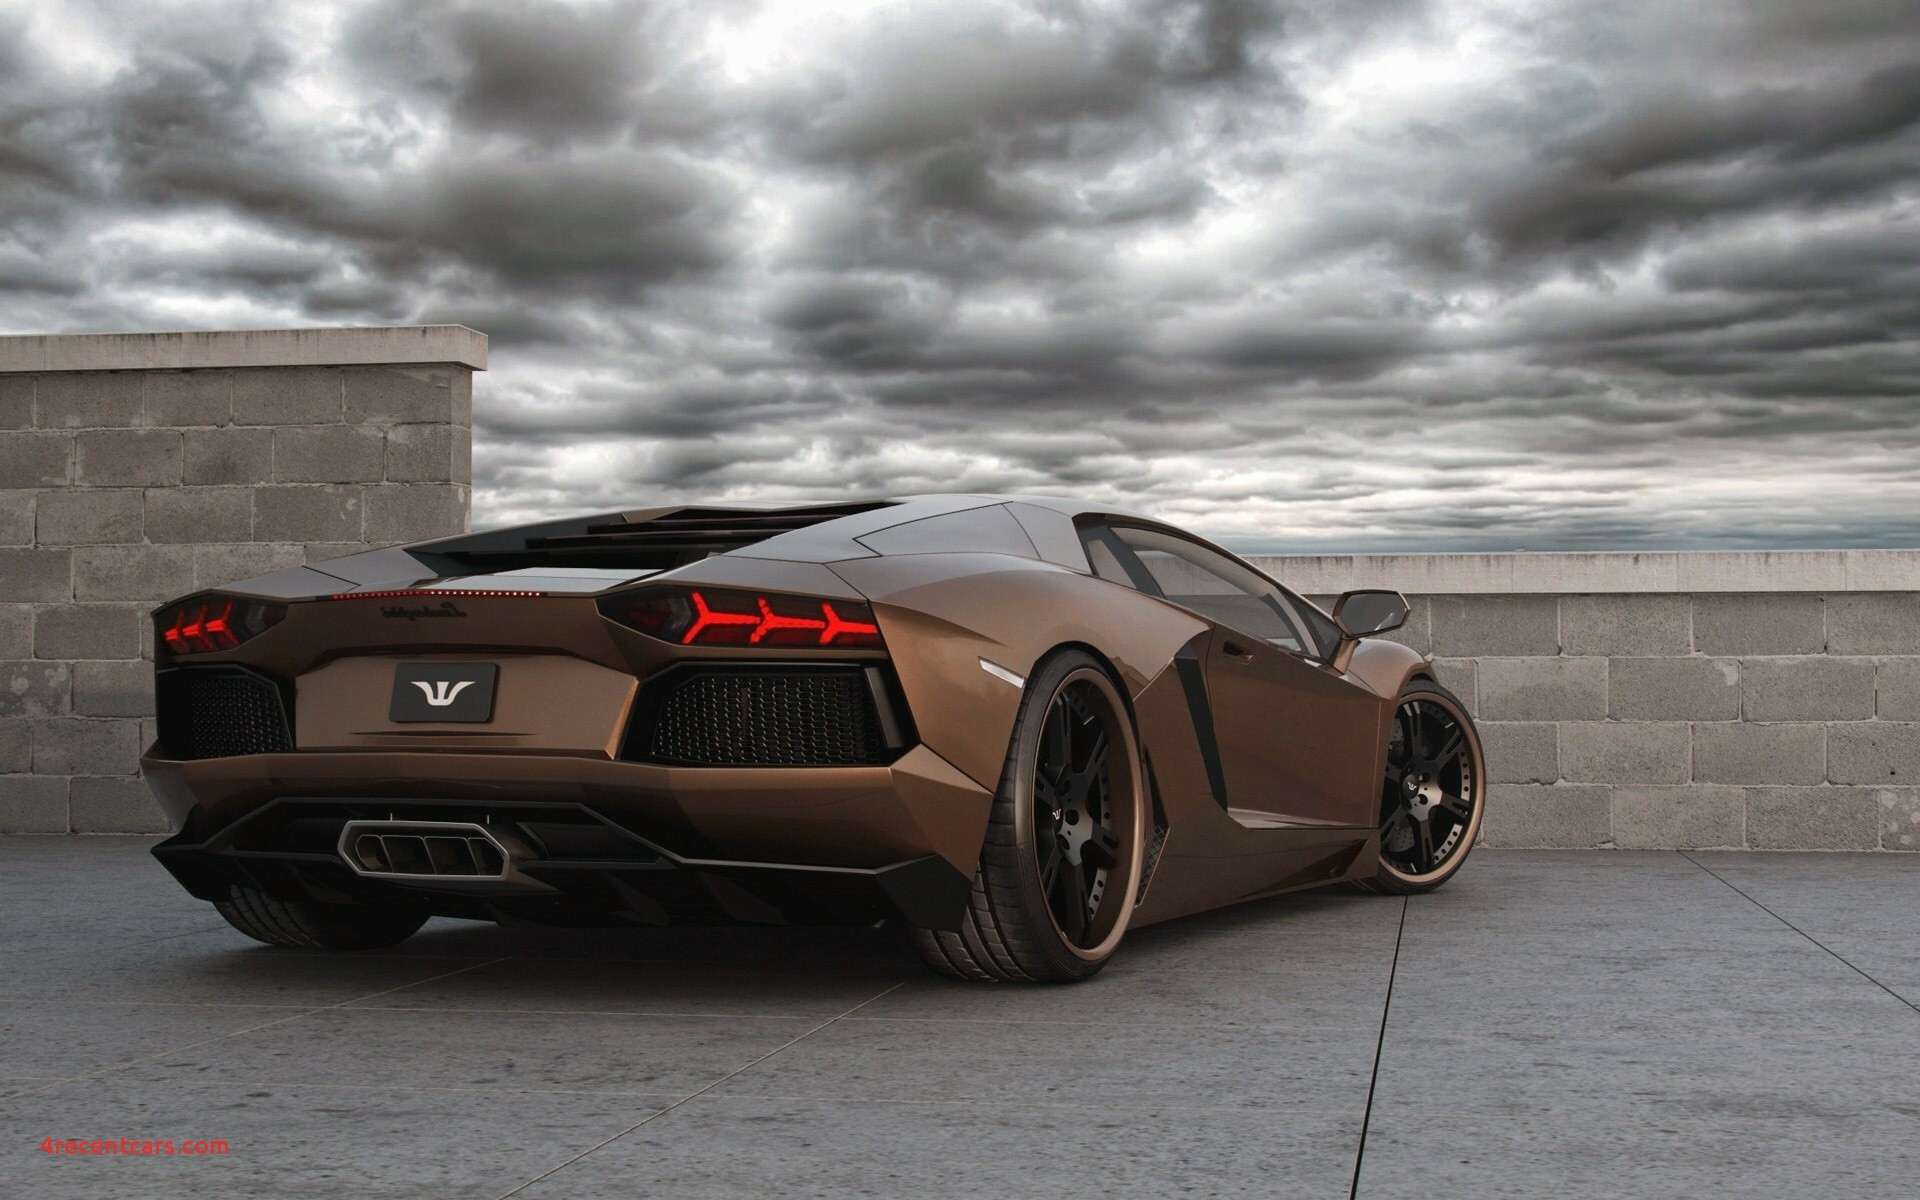 Awesome Best Car Wallpapers Hd For Mobile Widescreen - Lamborghini Cars Wallpapers Hd - HD Wallpaper 